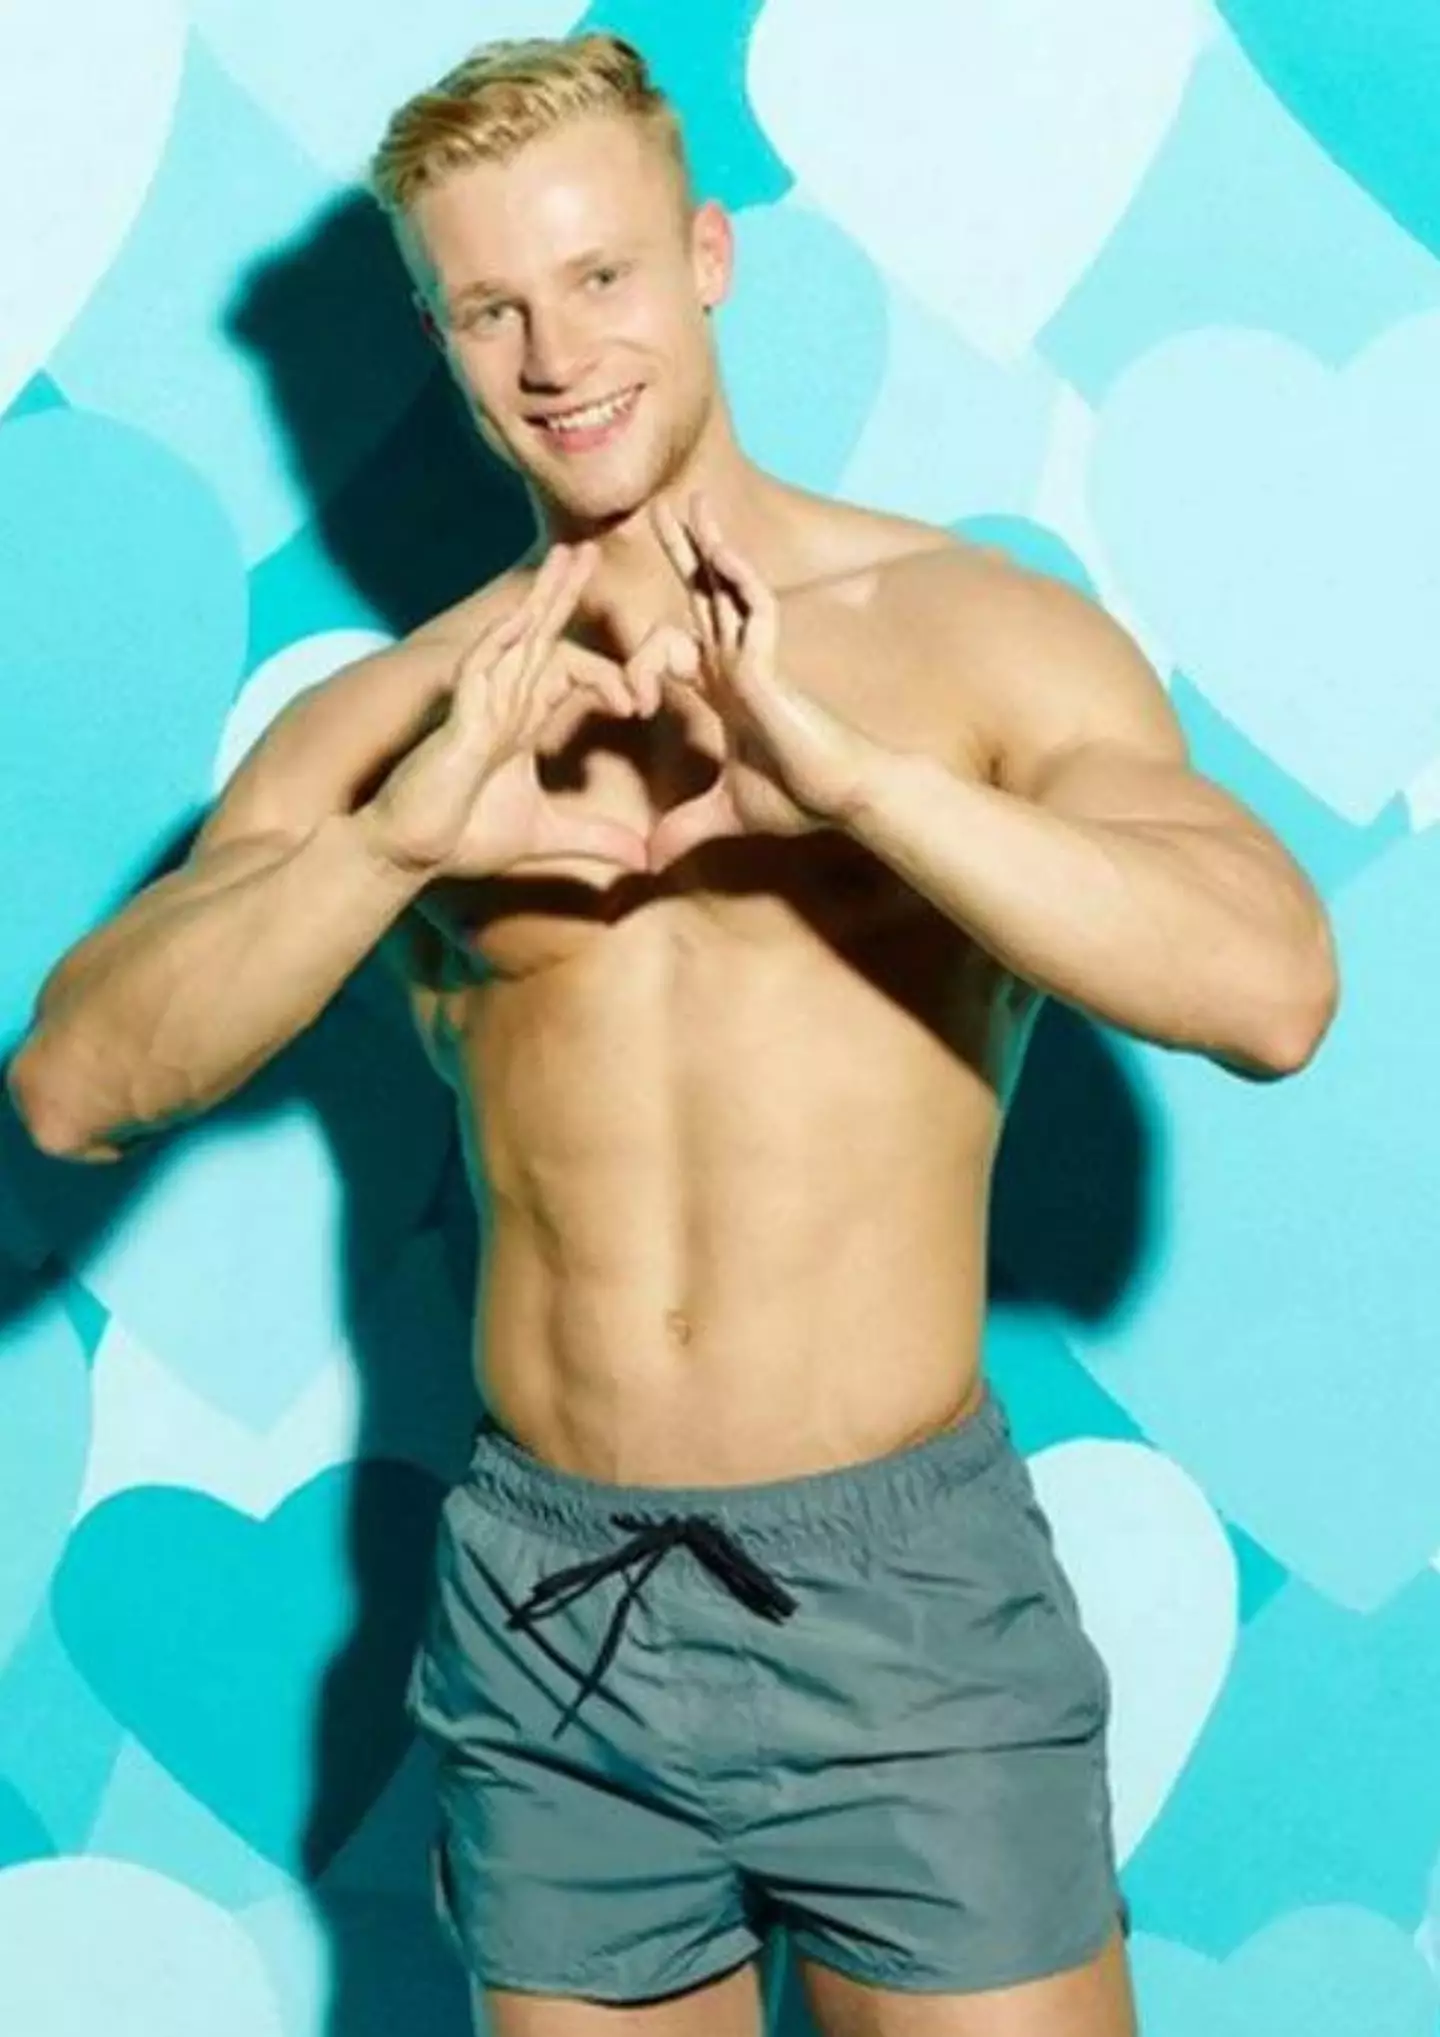 Harley Judge appeared on Love Island back in 2017.